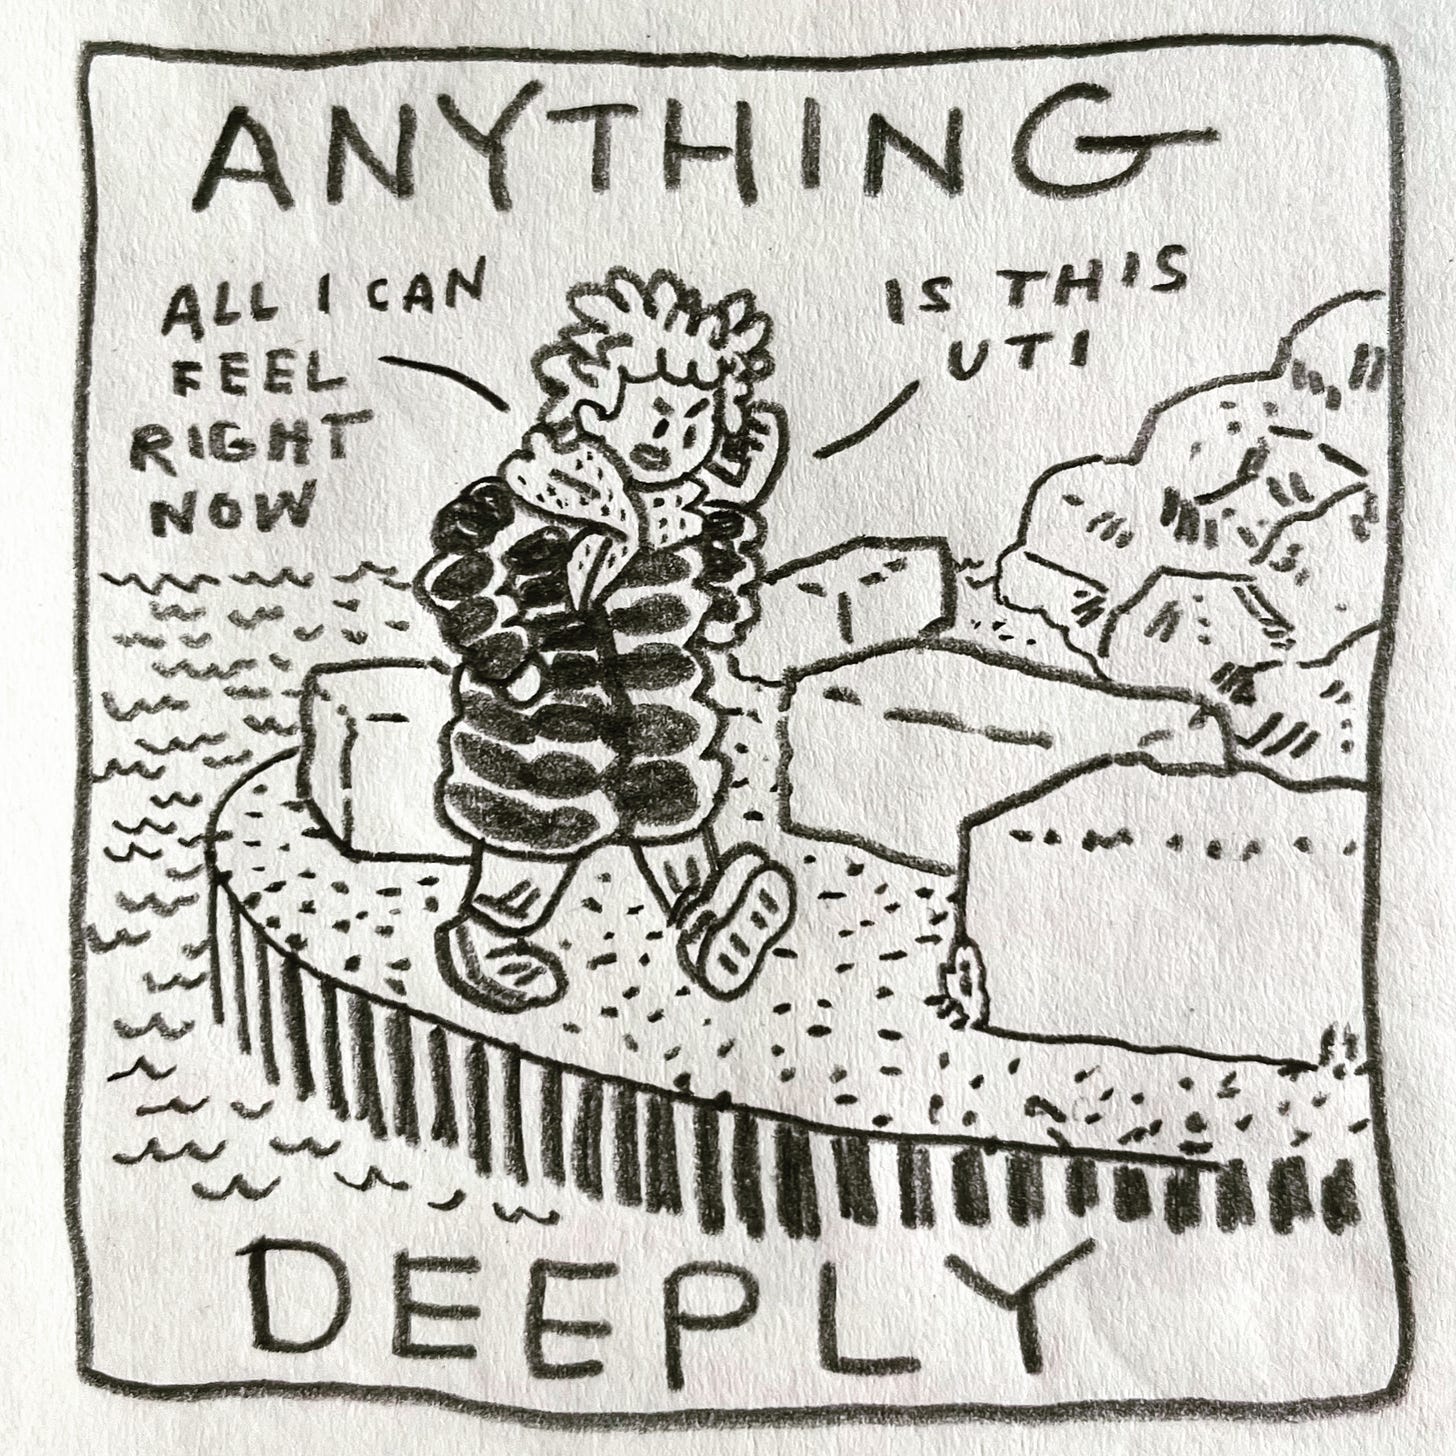 Panel 3: anything deeply Image: Lark is walking outside again, wearing a different puffy black coat. They walk past concrete benches on an outcropping overlooking Lake Michigan. They look grumpy, speaking into the phone held against her face, “all I can feel right now is this UTI"